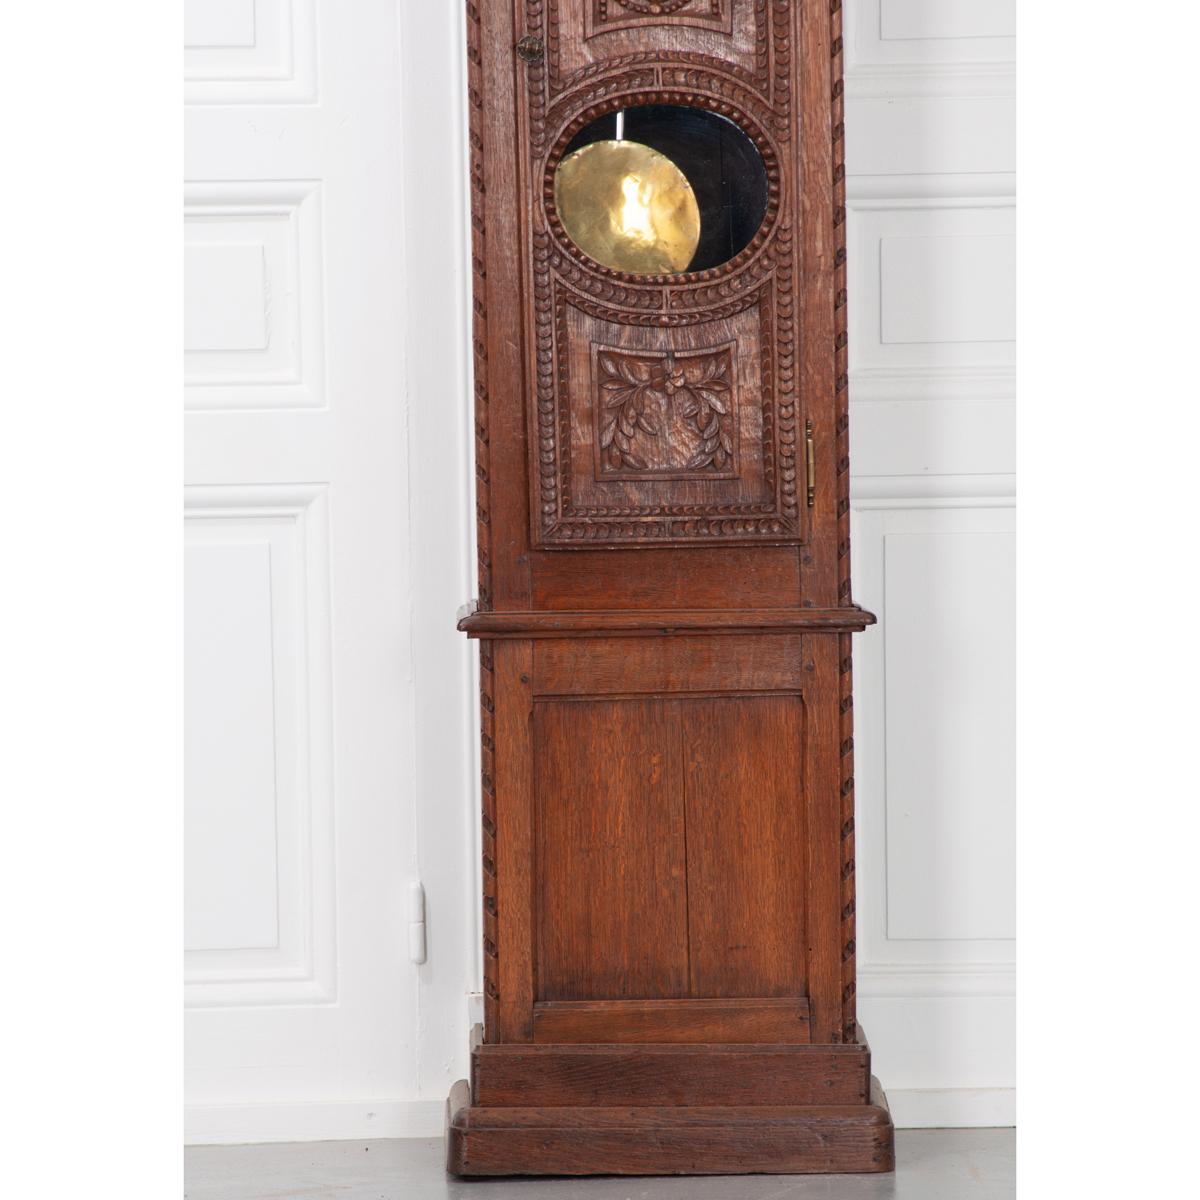 French Provincial French 19th Century Provincial Horloge Case Clock For Sale